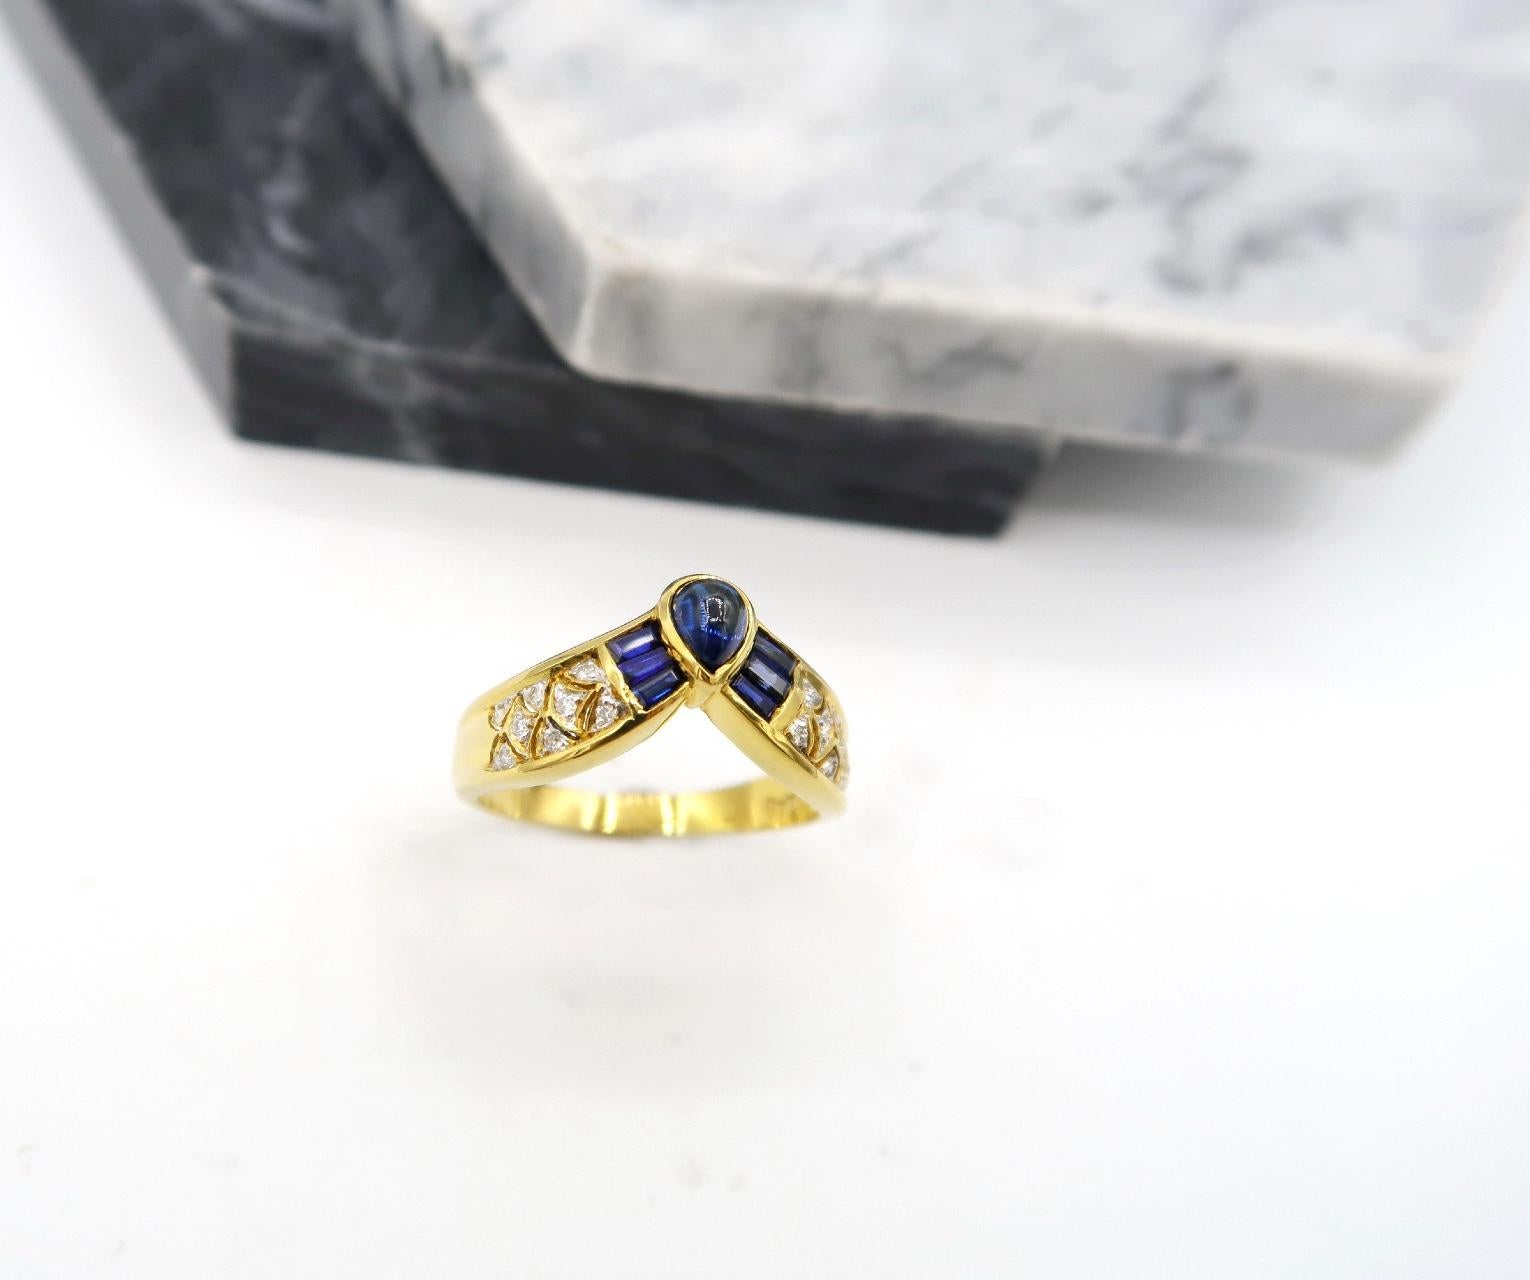 Cabochon Pear Shaped Blue Sapphire Chevron Wishbone Ring in 18K Yellow Gold embellished with channel set baguette blue sapphire and diamond lace scale detail

Ring size: 53.5
Please let us know should you wish to have the ring resized.